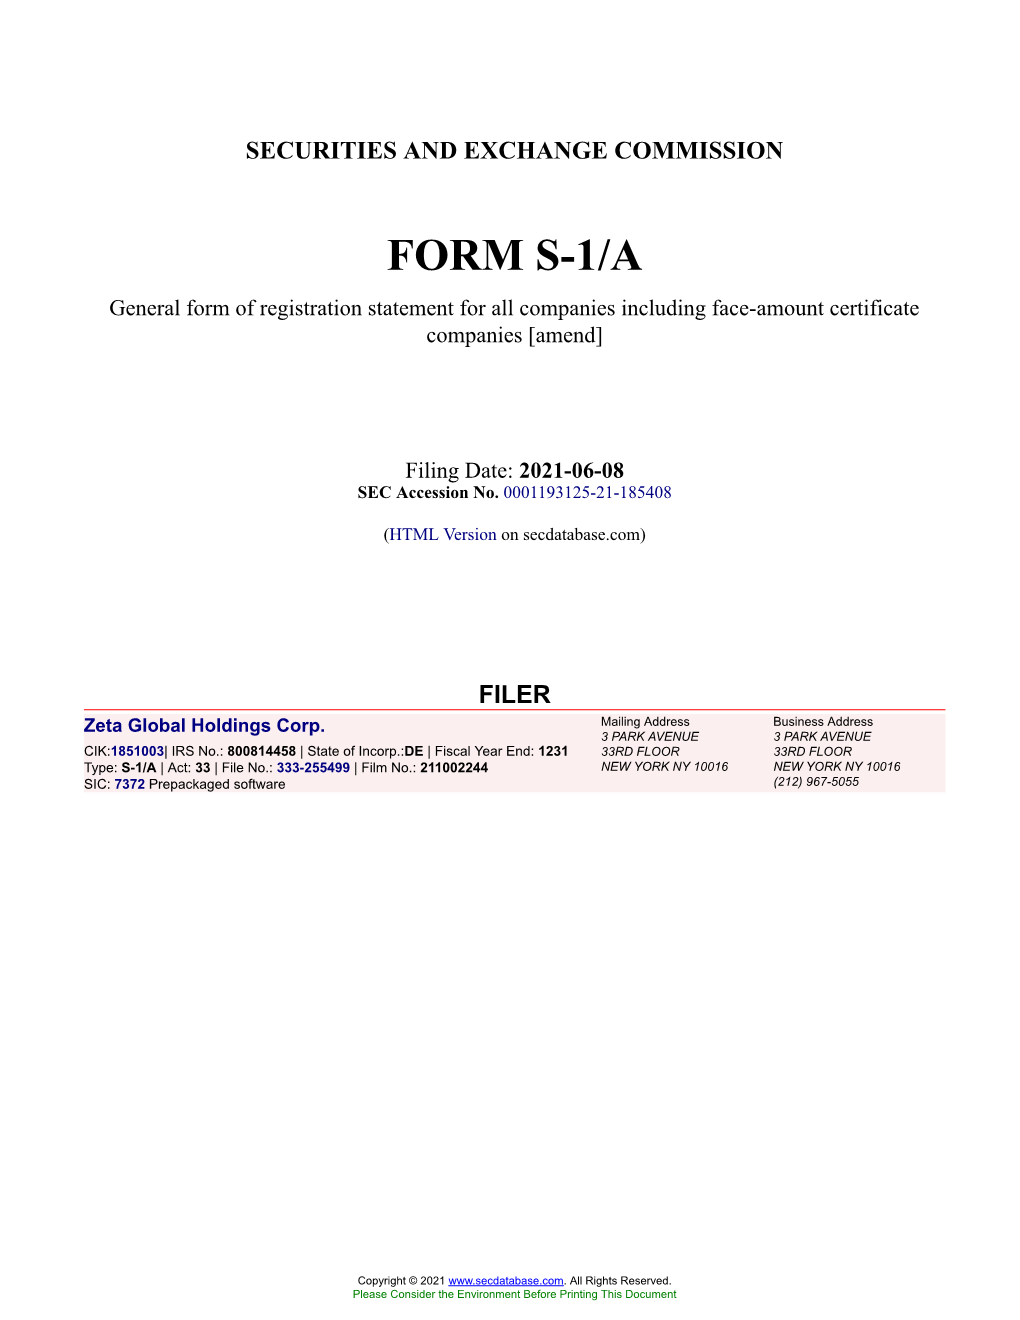 Zeta Global Holdings Corp. Form S-1/A Filed 2021-06-08